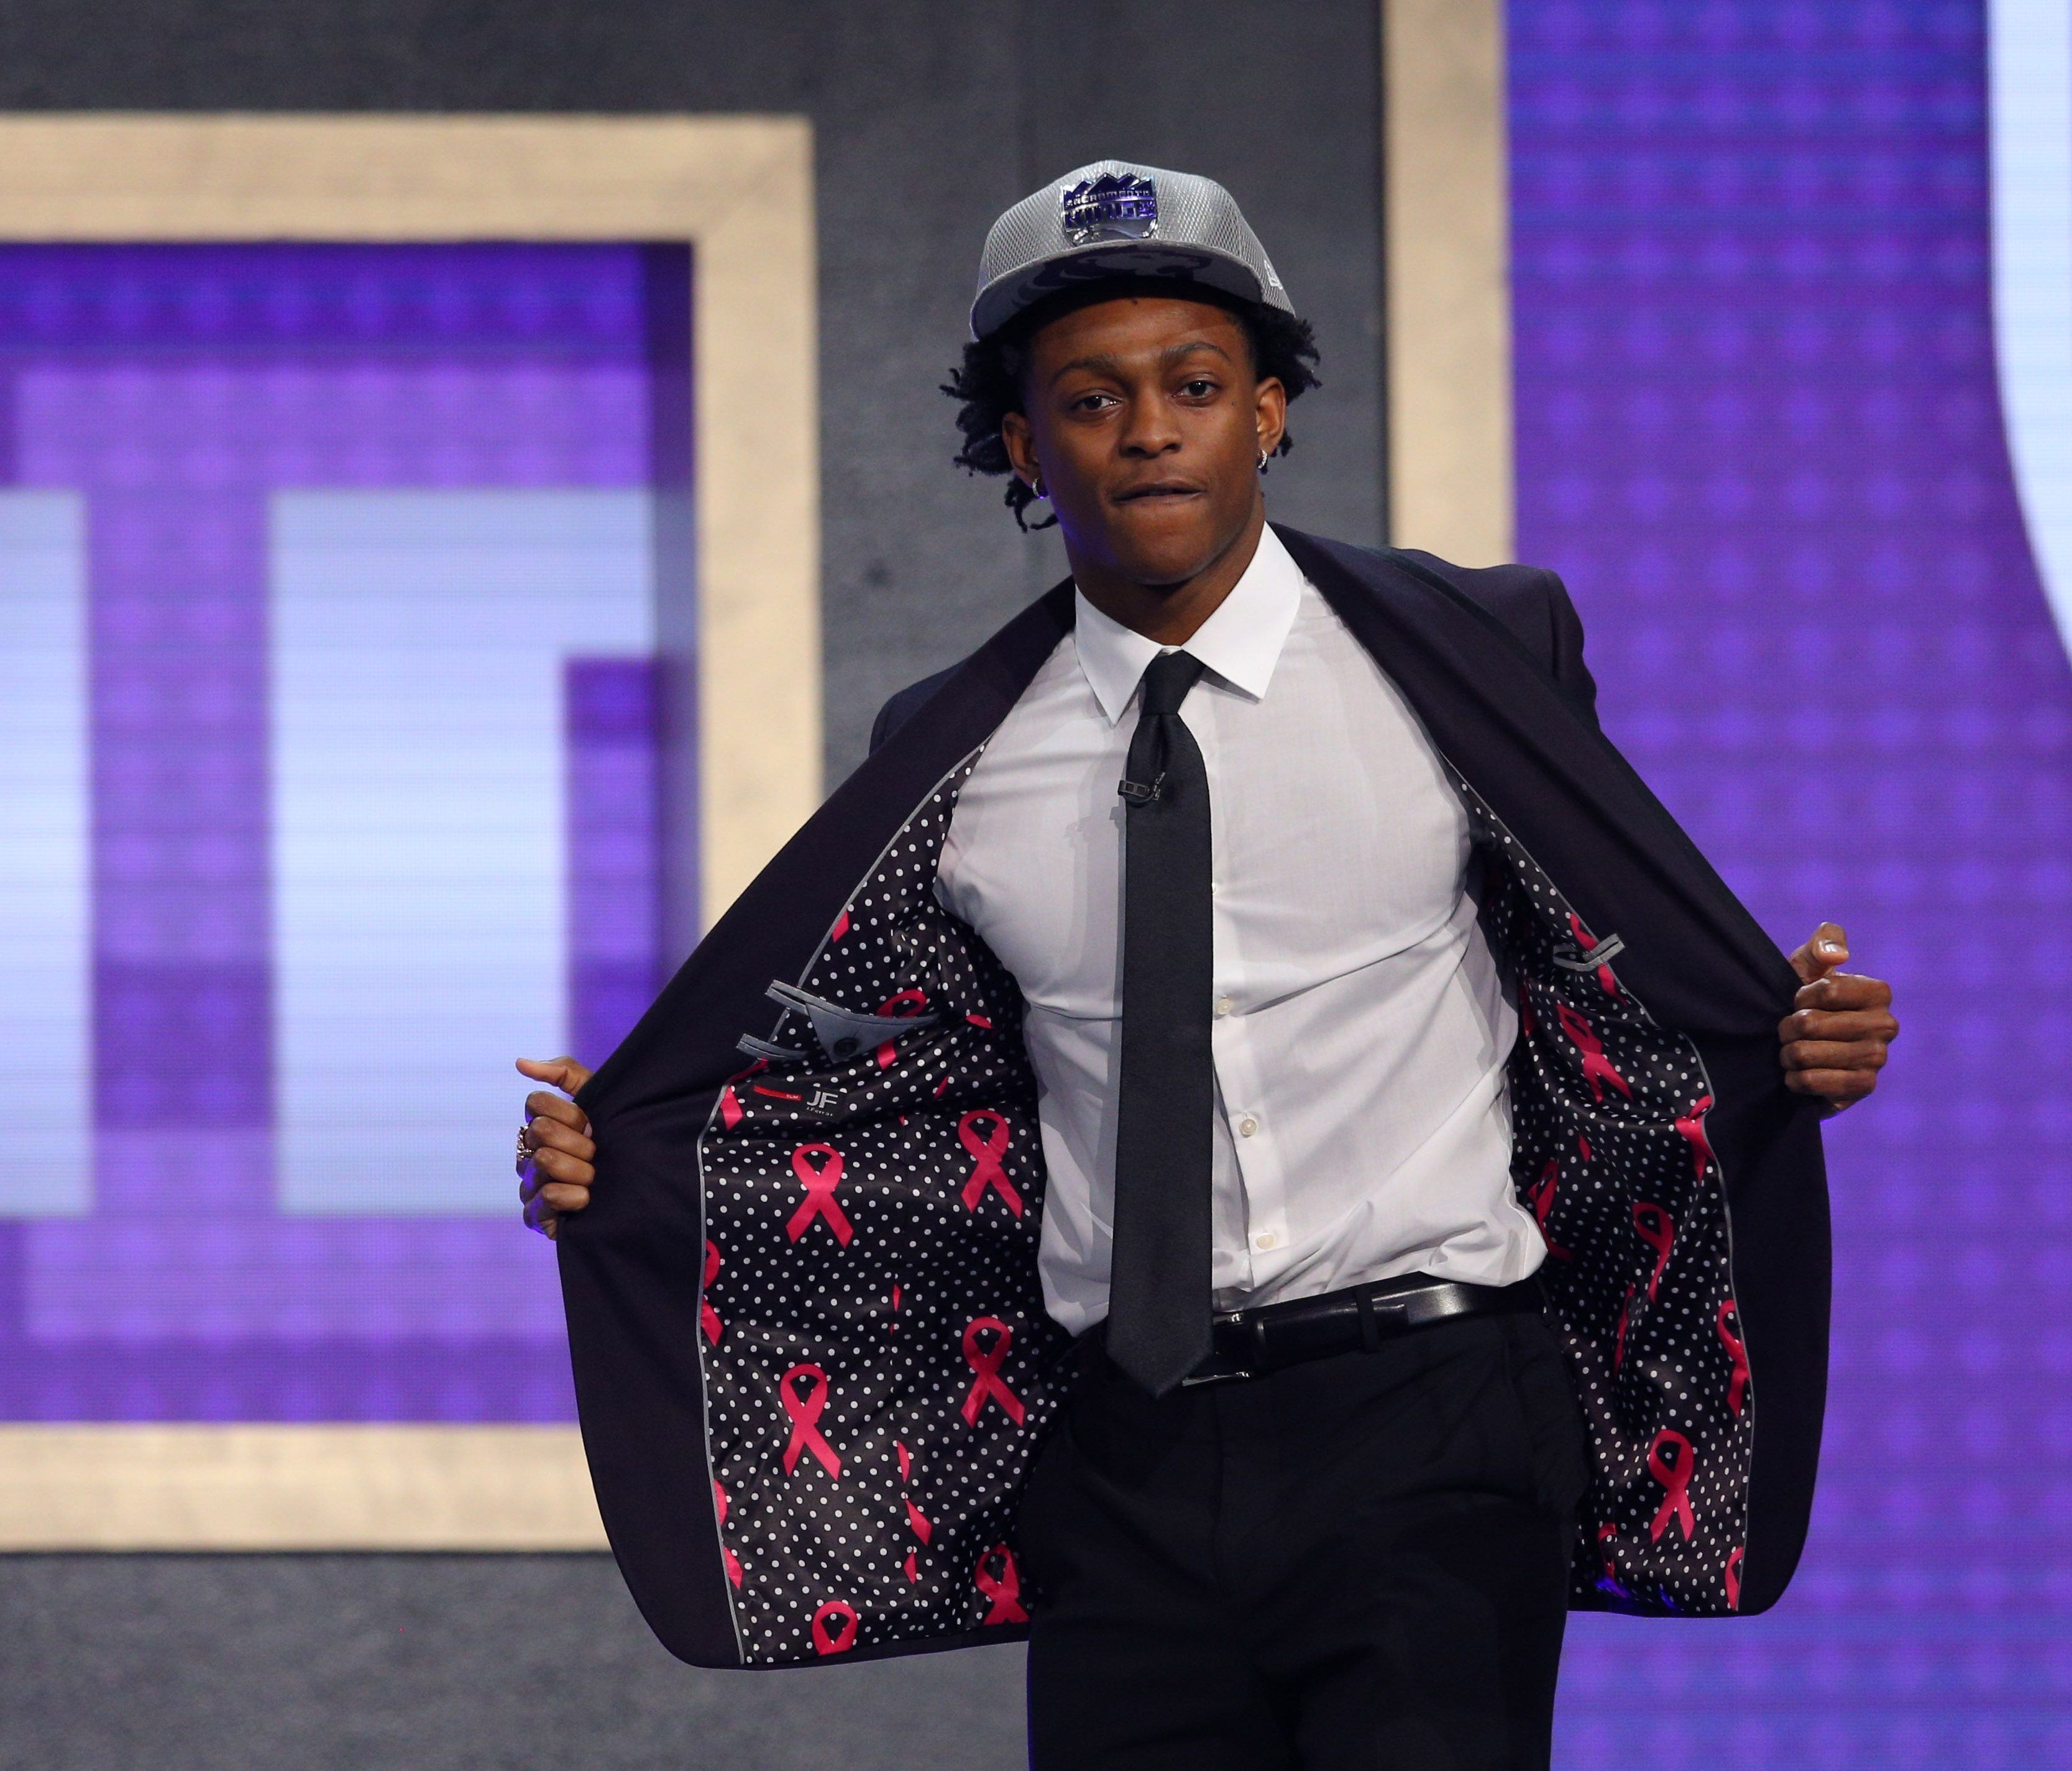 De'Aaron Fox (Kentucky) shows off the inside of his suit after being introduced as the number five overall pick to the Sacramento Kings in the first round of the 2017 NBA Draft at Barclays Center.